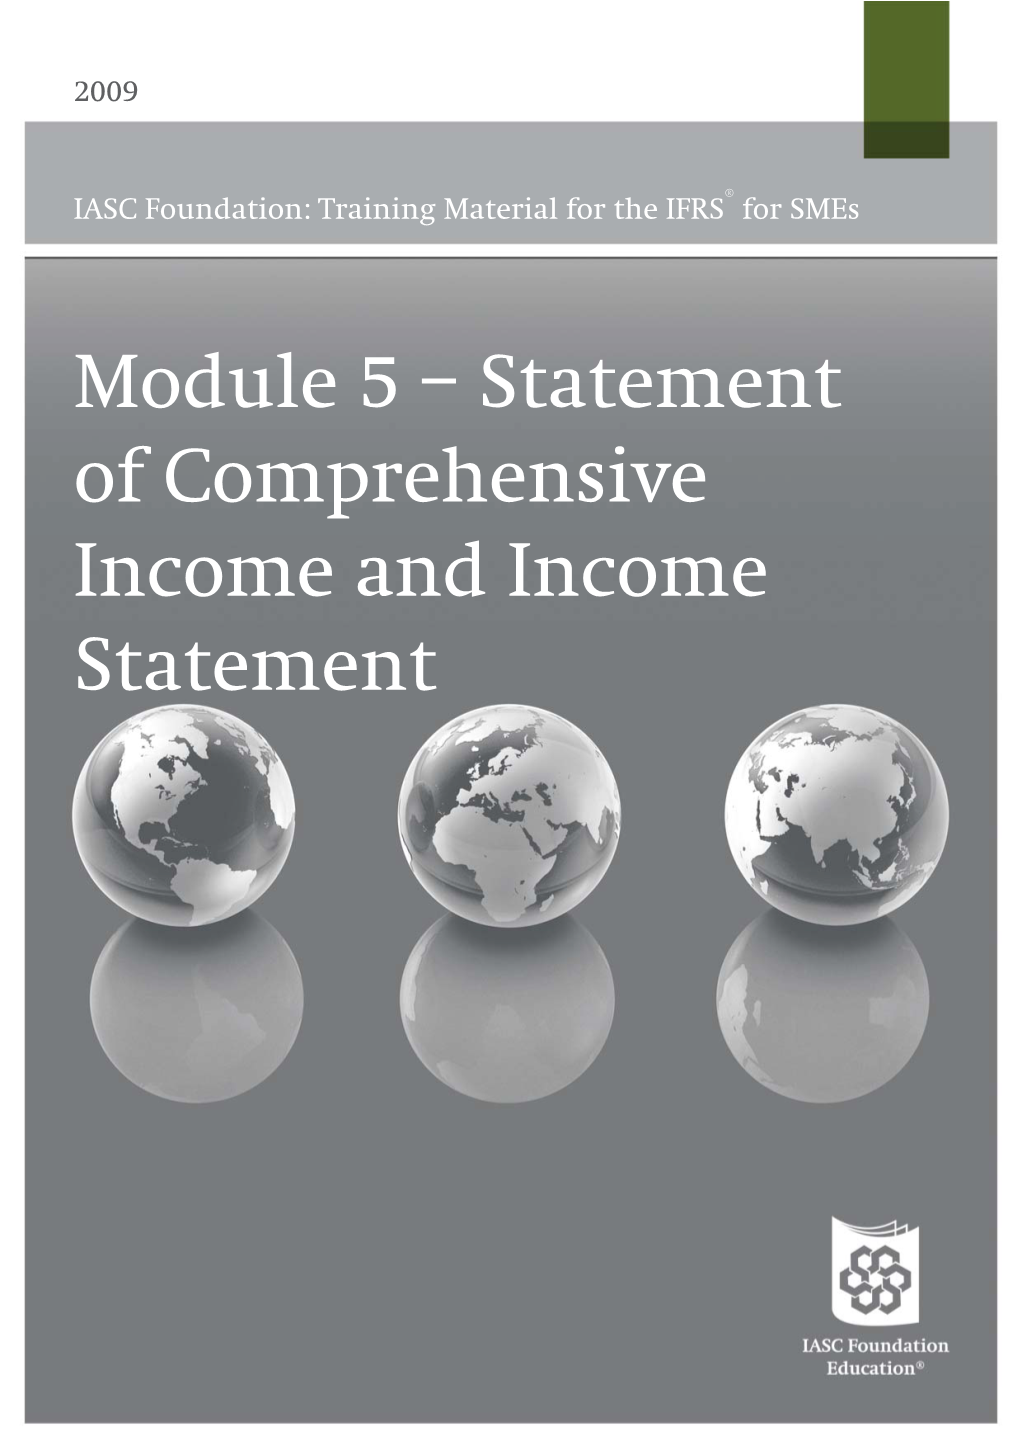 Statement of Comprehensive Income and Income Statement